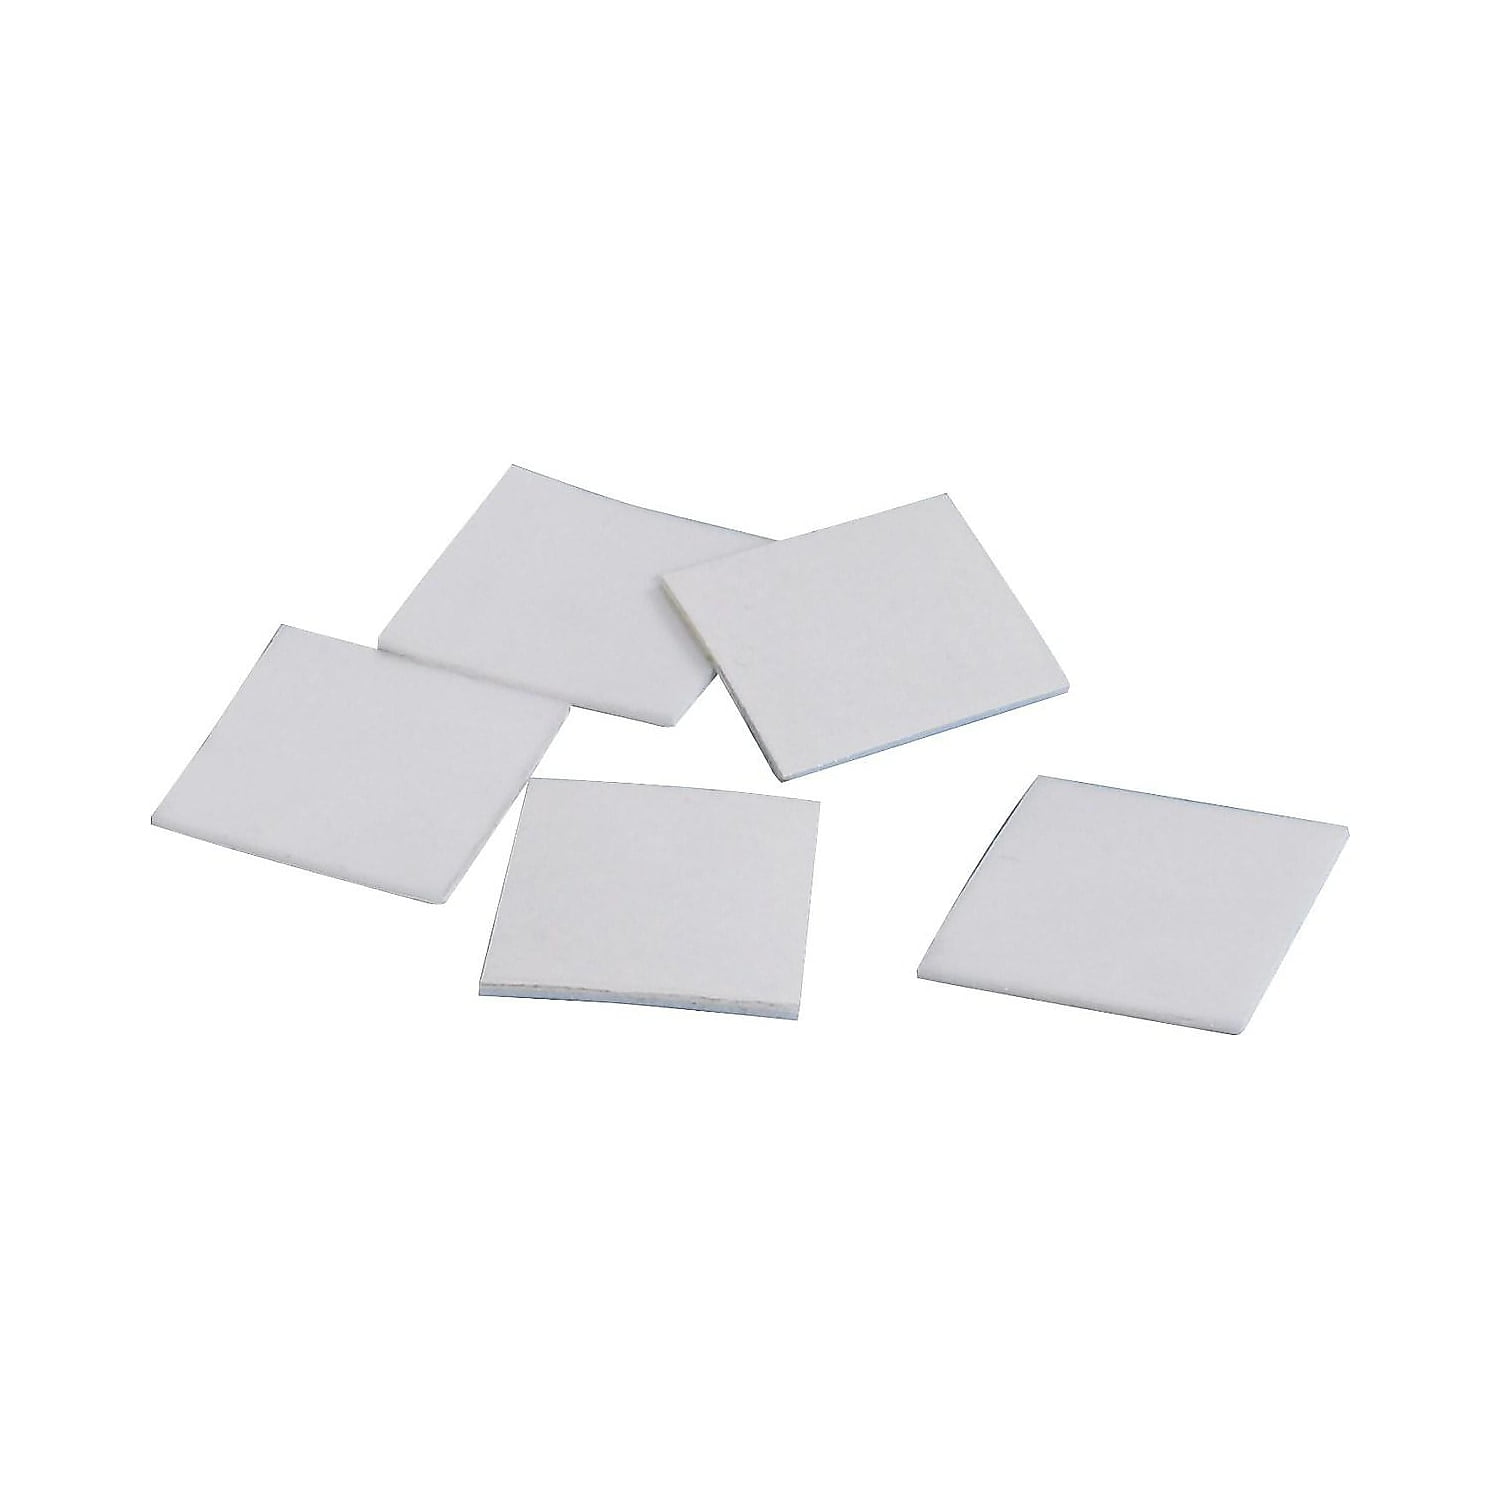 Removable Double-Sided Foam Squares - 1/16 thick, 1 x 1 S-13709